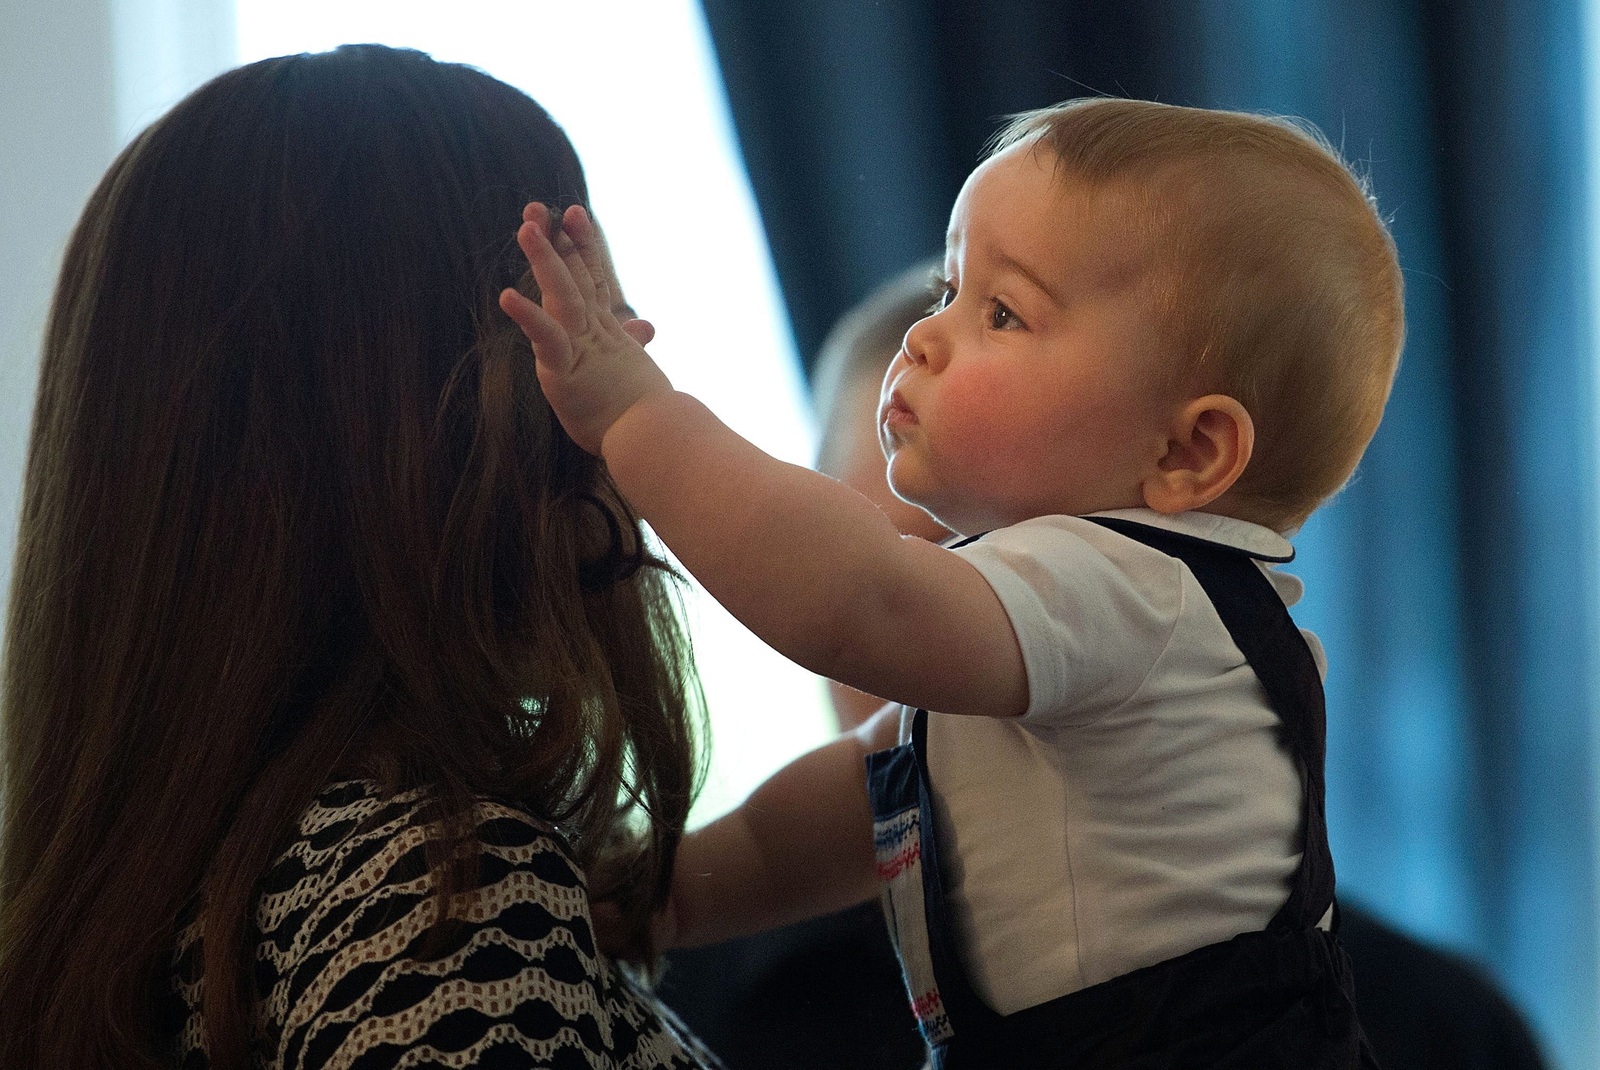 epa04159872 Catherine, Duchess of Cambridge holds Prince George during a Plunket nurse and parents group visit at Government House in Wellington, New Zealand, 09 April 2014. Plunket is a national not-for-profit organisation that provides care for children and families in New Zealand. EPA/Marty Melville / POOL +++(c) dpa - Bildfunk+++